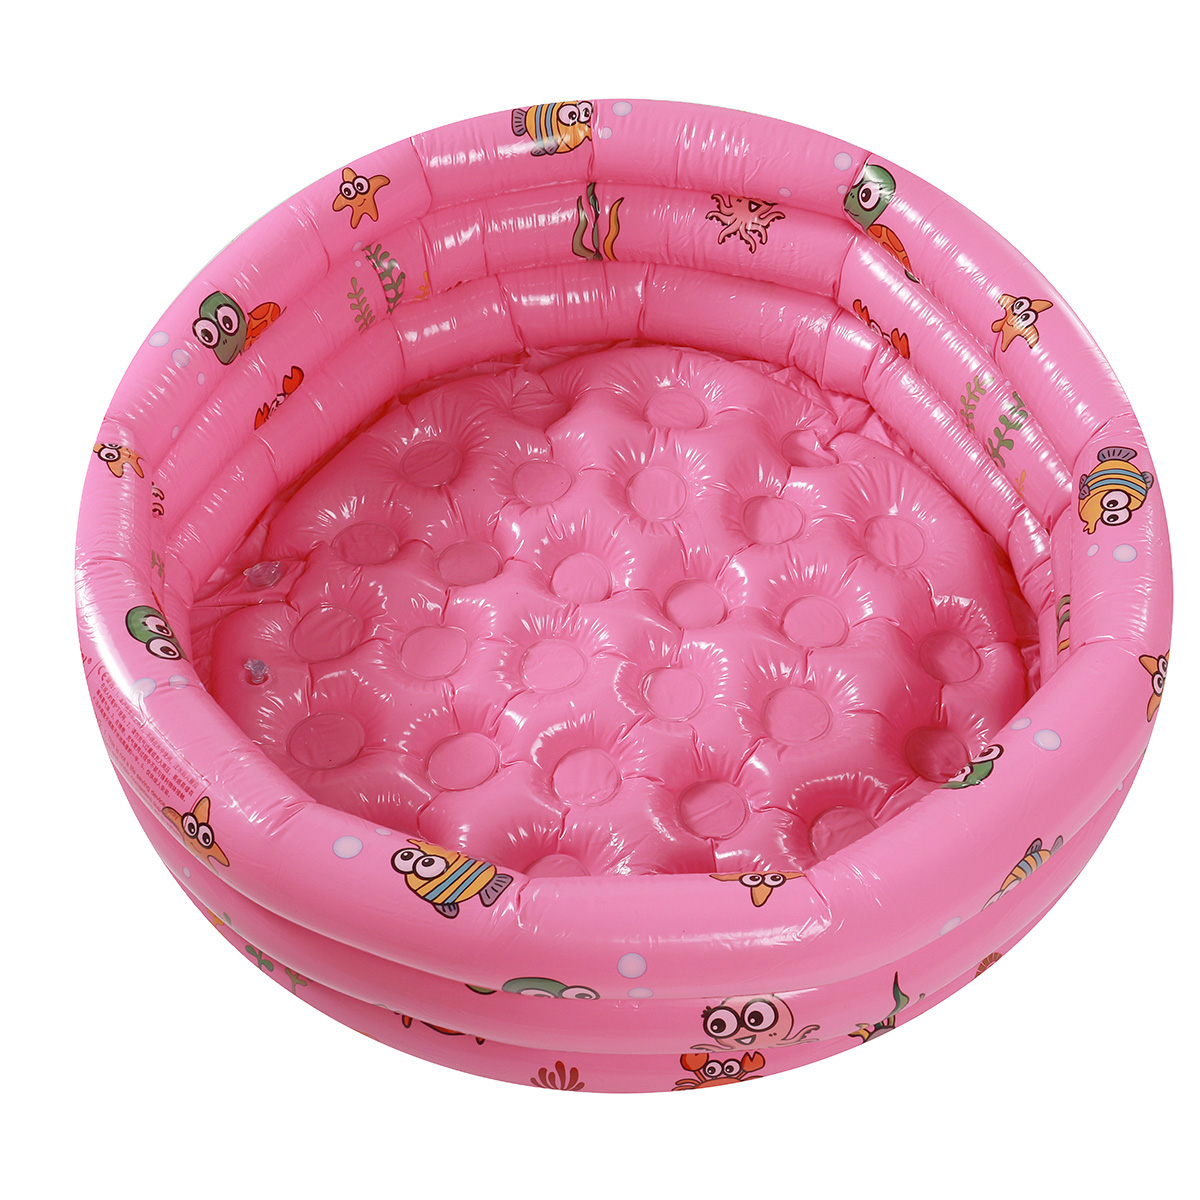 Thick-PVC-Inflatable-Swimming-Pool-Childrens-Baby-Bathing-Pool-Three-Tube-Inflatable-Childrens-Round-1856495-8